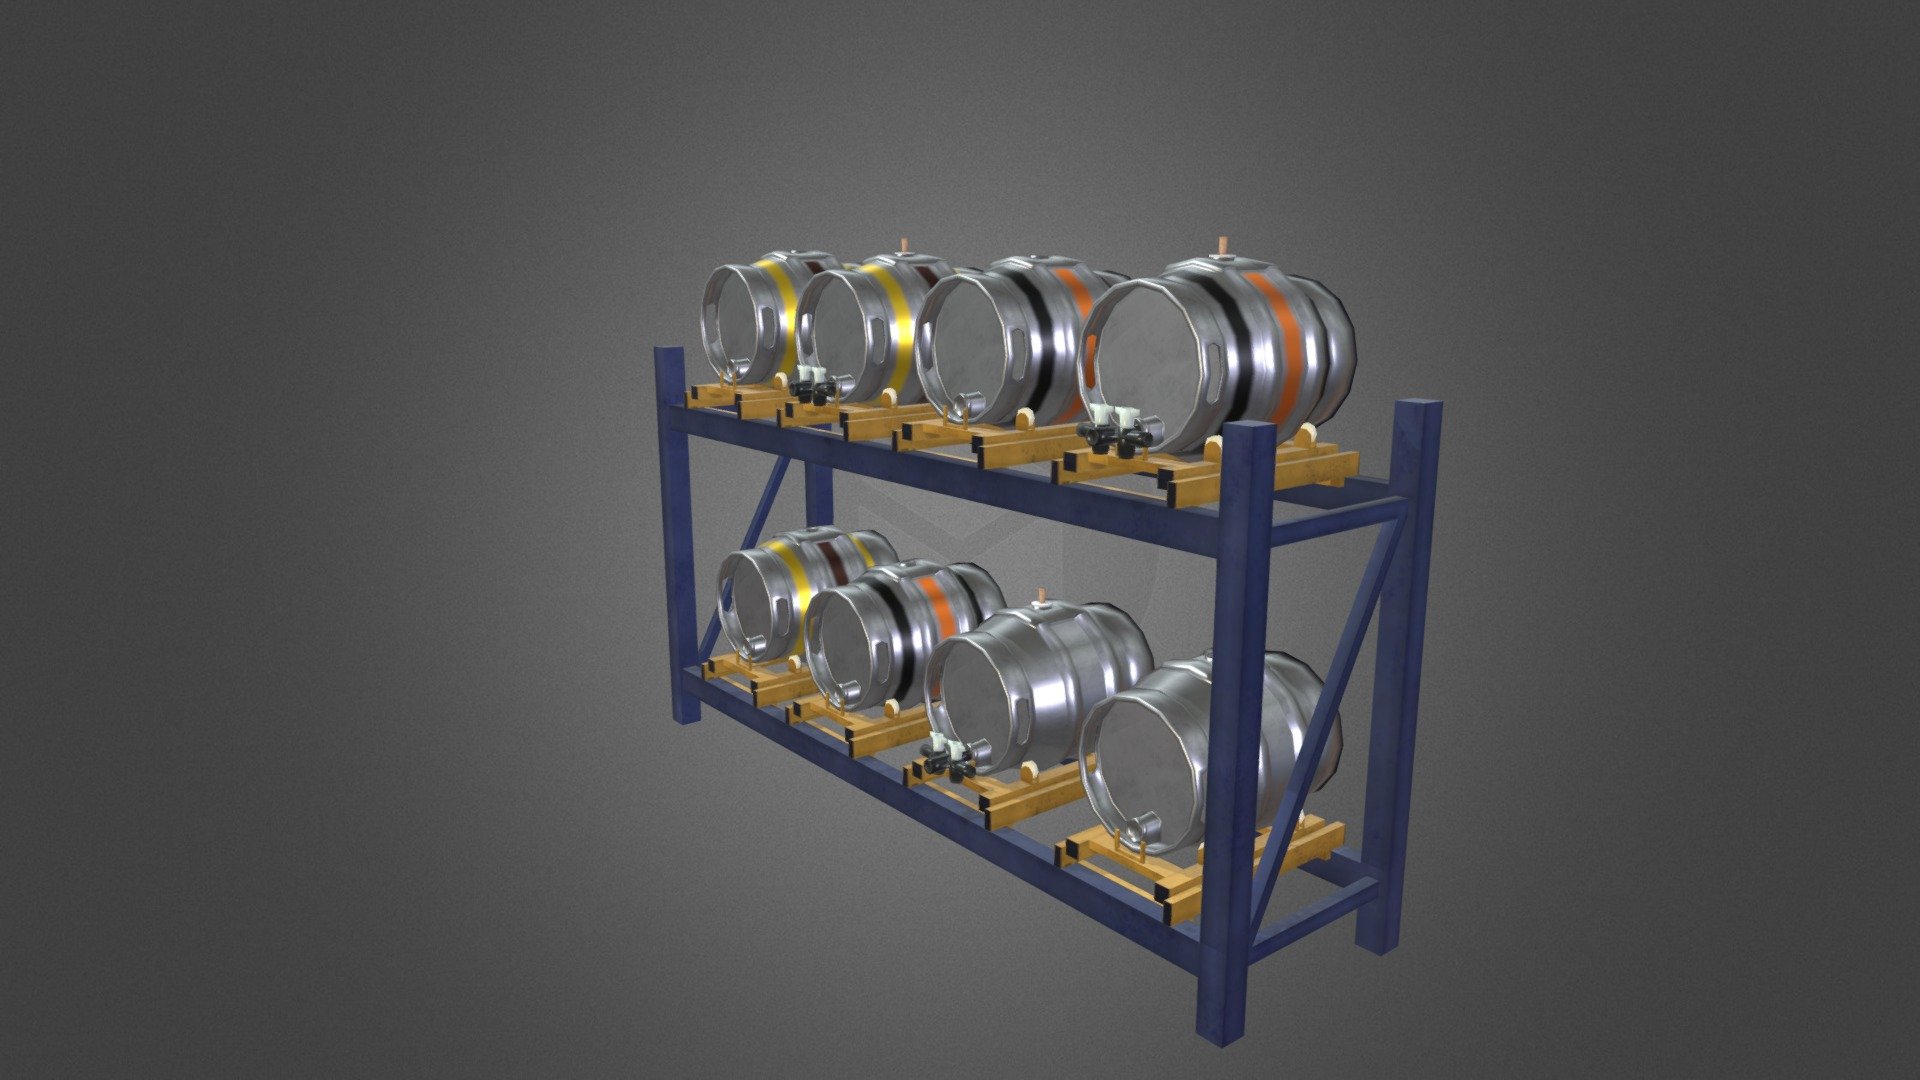 A tilting rack (or stillage) serves to store casks in an efficient manner while automatically tilting the cask as it empties to maintain good flow of beer straight to your pint.

Part of the Pub &amp; Micro Brewery Asset Pack avaliable on Unity Asset Store.

Features:


Quad-based mesh
Low-poly model suitable for realtime rendering (game engines, AR, VR)
1024px PBR textures, set up for Unity Standard Shader (smoothness is in alpha channel of metallic)

Included files:


Original .blend file 
FBX file
Textures
Reference images where appropriate

Check out the rest of the Brewery Collection: https://skfb.ly/6RwyO

Brewery Industrial Beer Process Manufacturing - Cask Ale Tilting Rack - Buy Royalty Free 3D model by Stainless Reality Ltd (@StainlessReality) 3d model